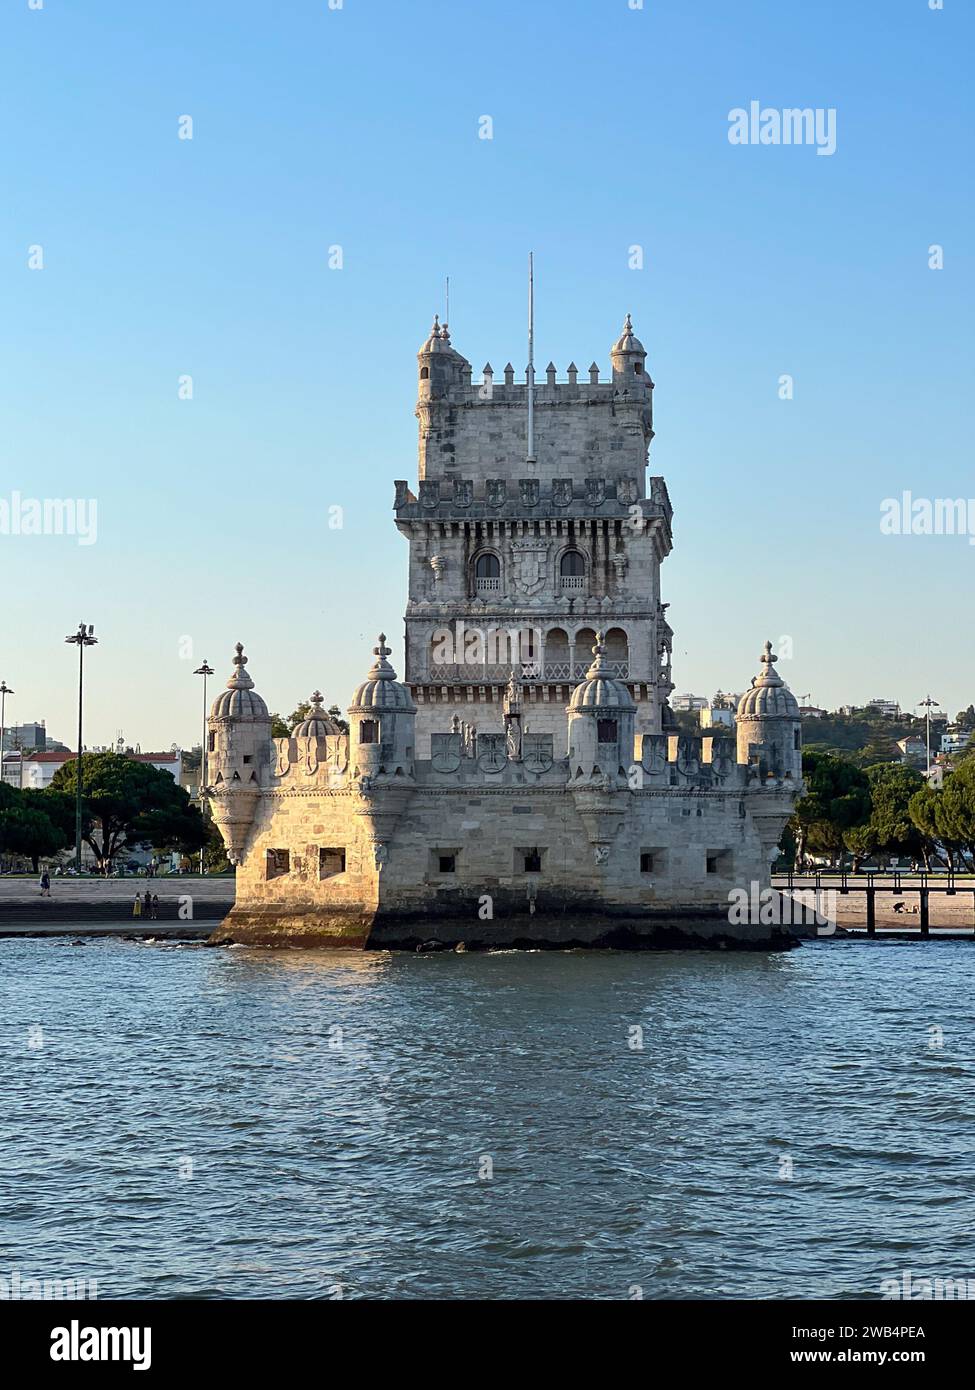 Belem Tower seen from Tagus River, Lisbon Stock Photo